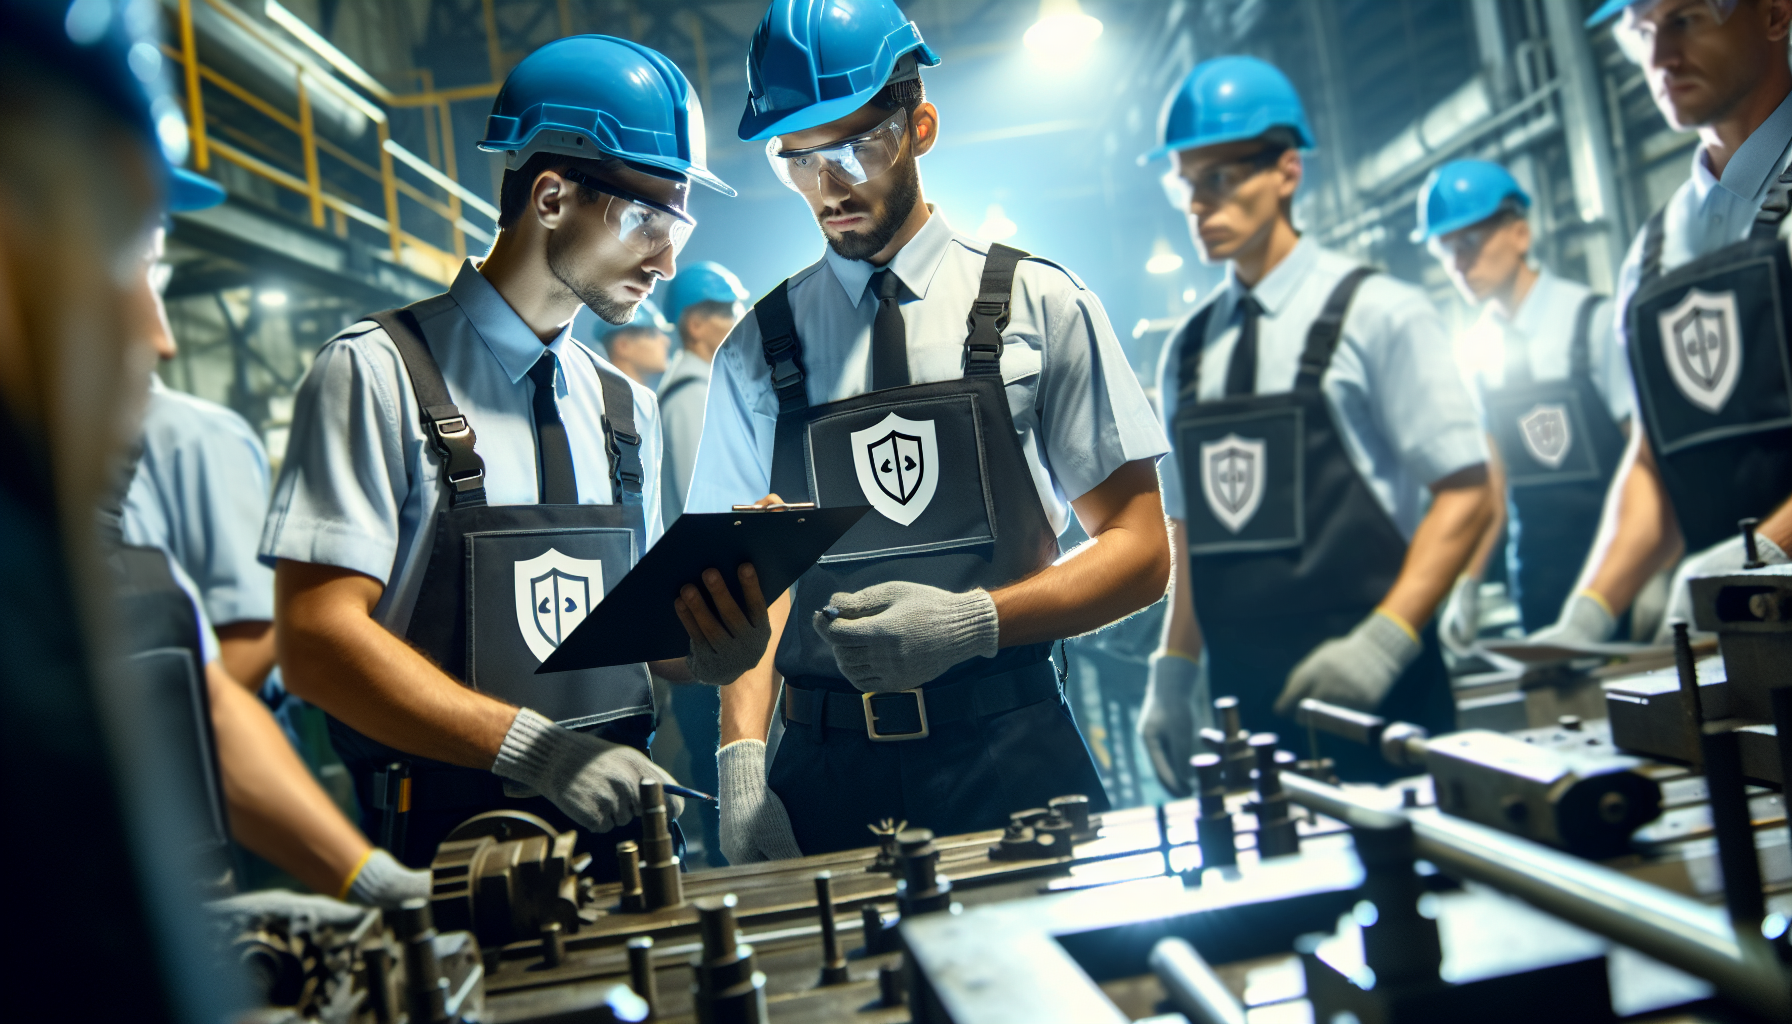 Illustration of security guards conducting a safety inspection at a workplace